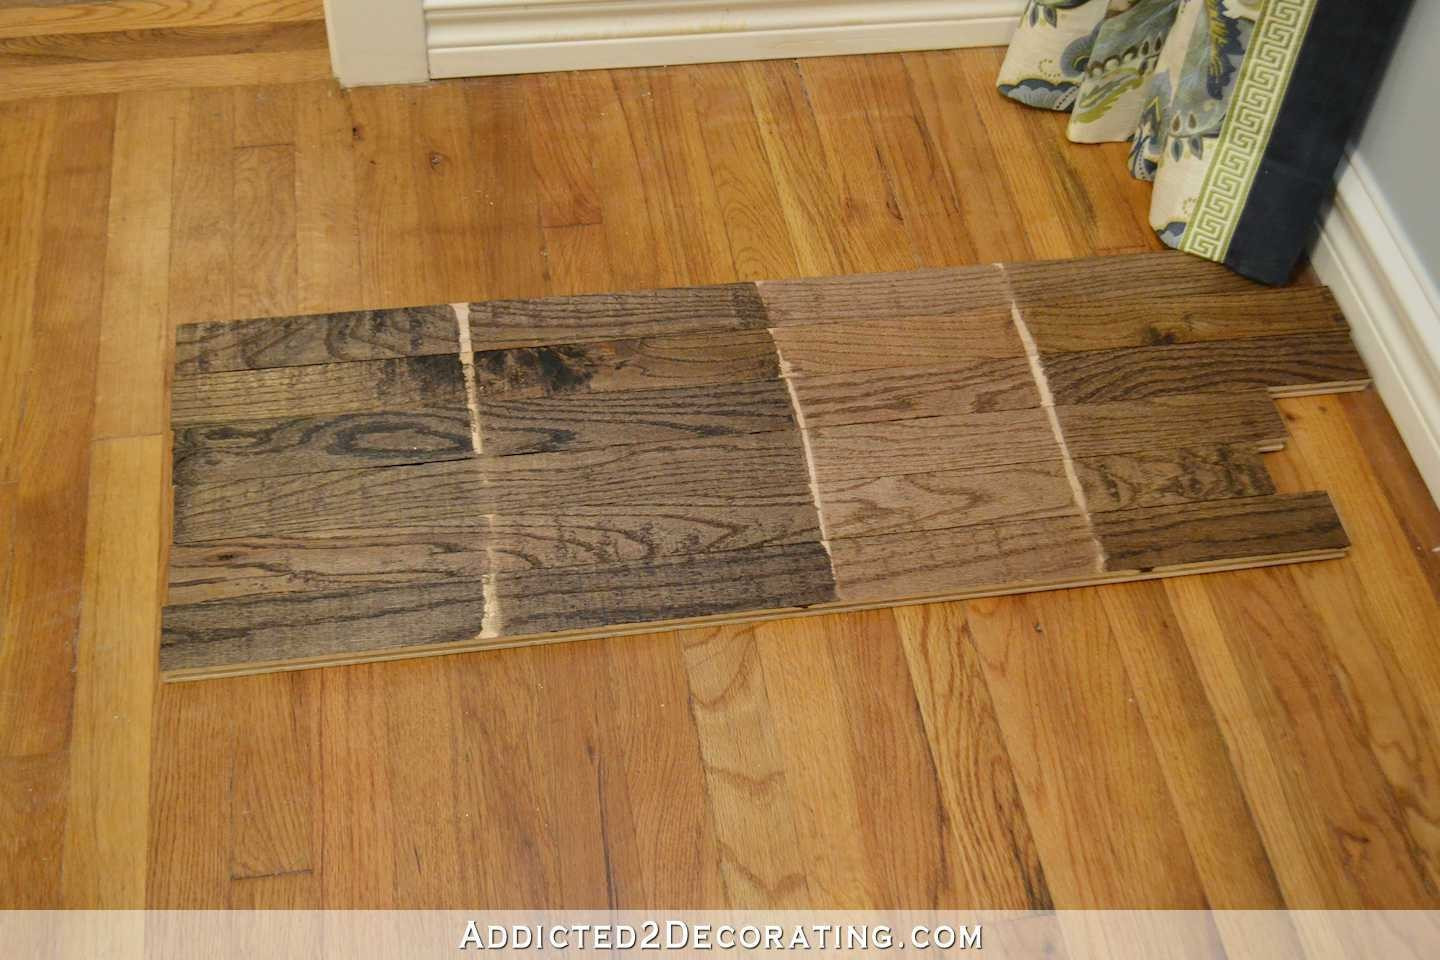 12 Fabulous Hardwood Flooring Under $3.00 2024 free download hardwood flooring under 3 00 of 15 unique hardwood floor stain colors photos dizpos com regarding hardwood floor stain colors inspirational shocking testing stain colors for my red oak hardw